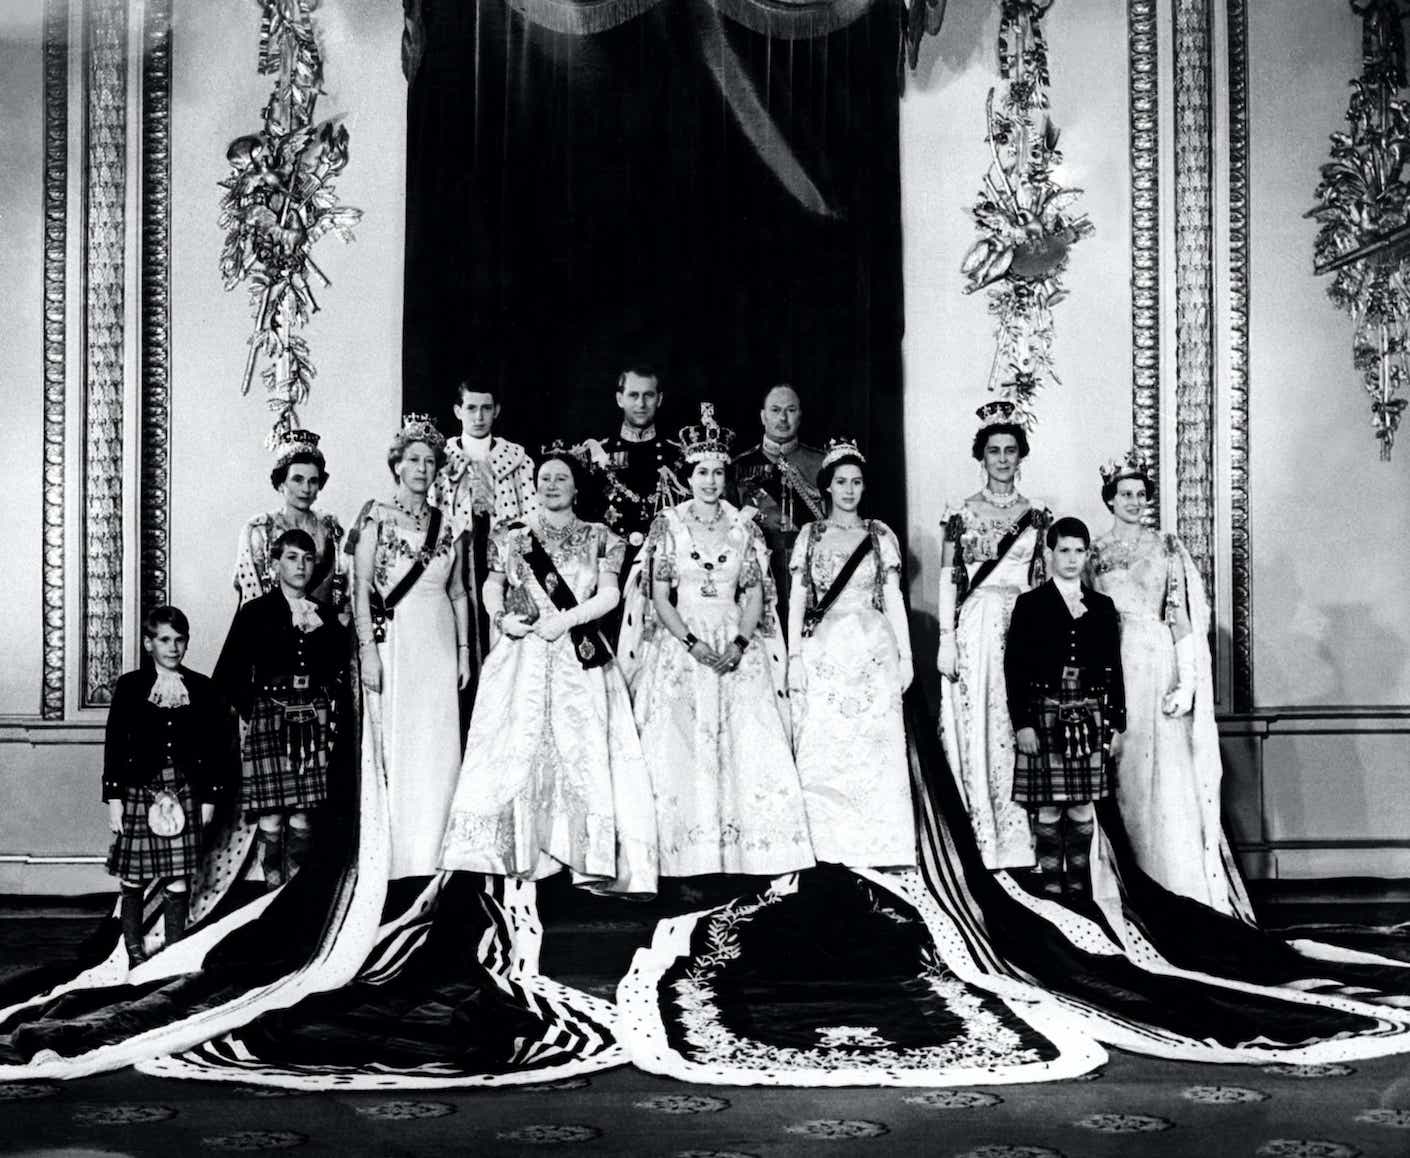 Queen Elizabeth II with her family on the Queen's Coronation's day at Buckingham Palace on June 2, 1953. She wears a long dress and crown.